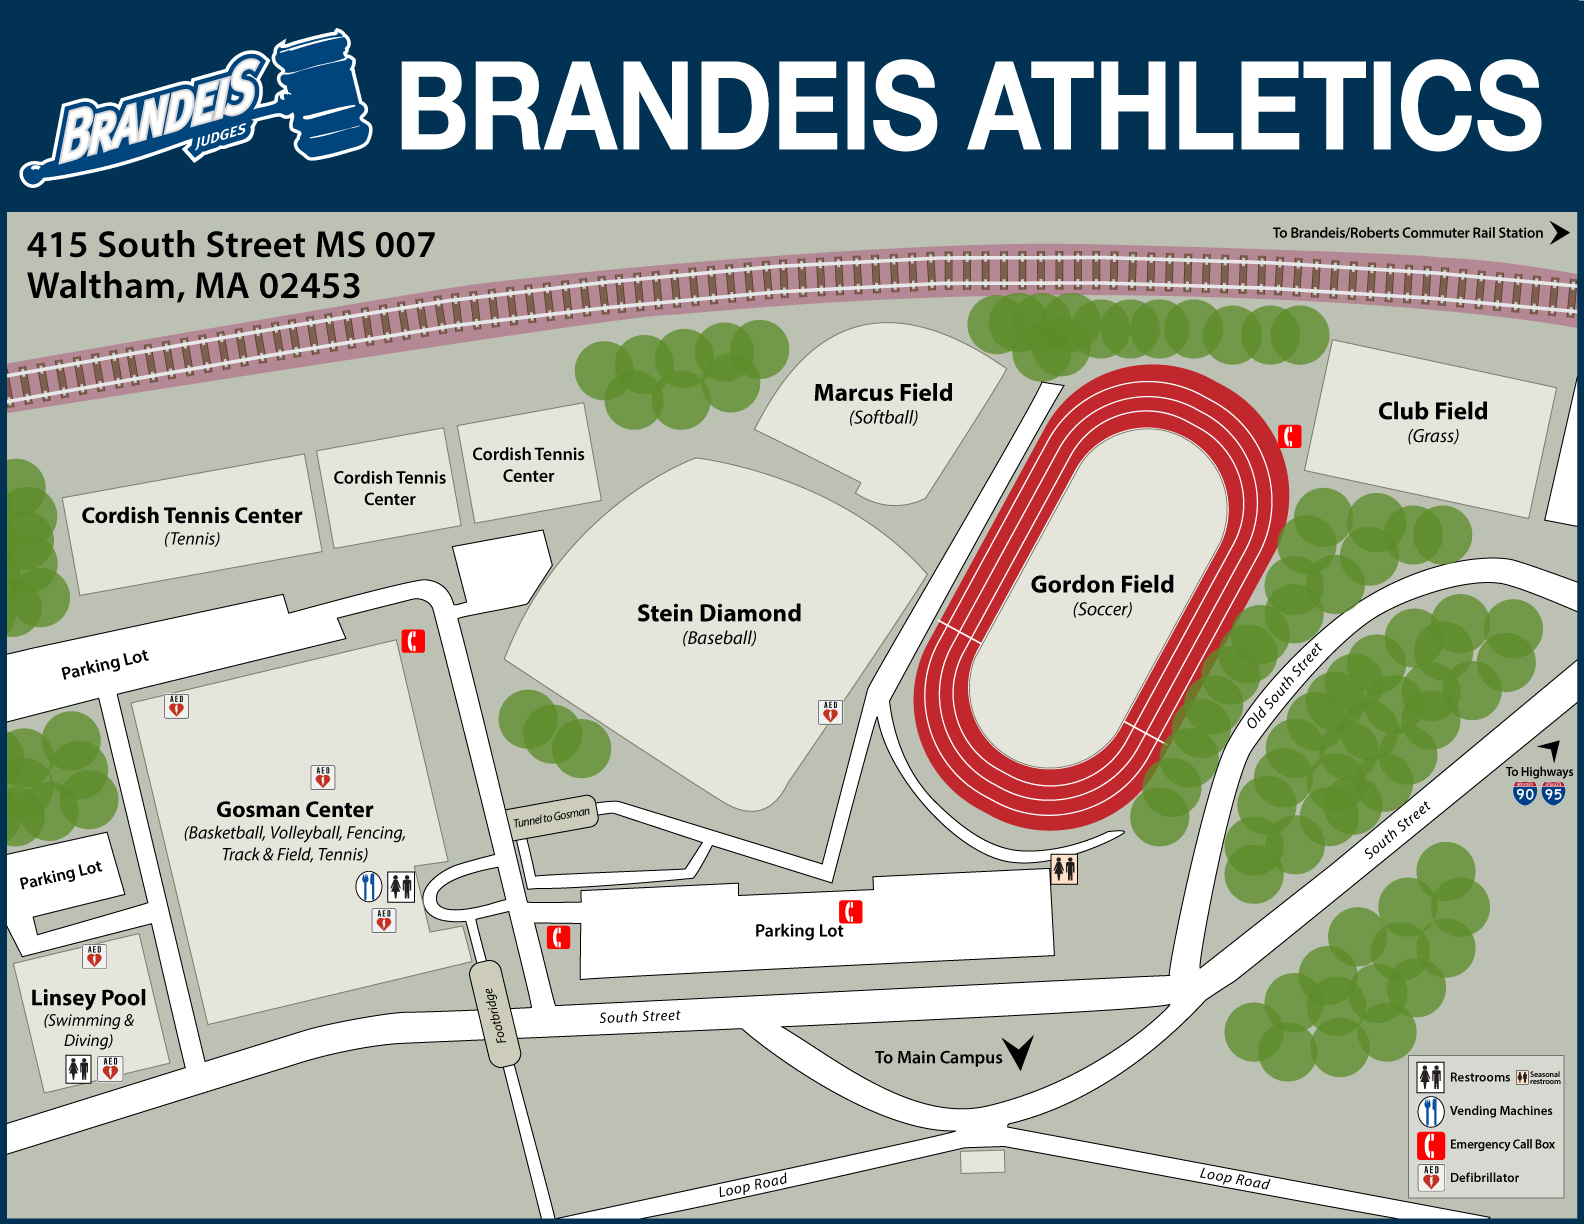 Map of Brandeis Athletics facilities:Gosman Center, Stein Diamond, Gordon Field, Rieger Tennis Courts, Marcus Field, Linsey Pool and parking located on the south side of 415 South Street (Brandeis Main Campus), Waltham MA 02453